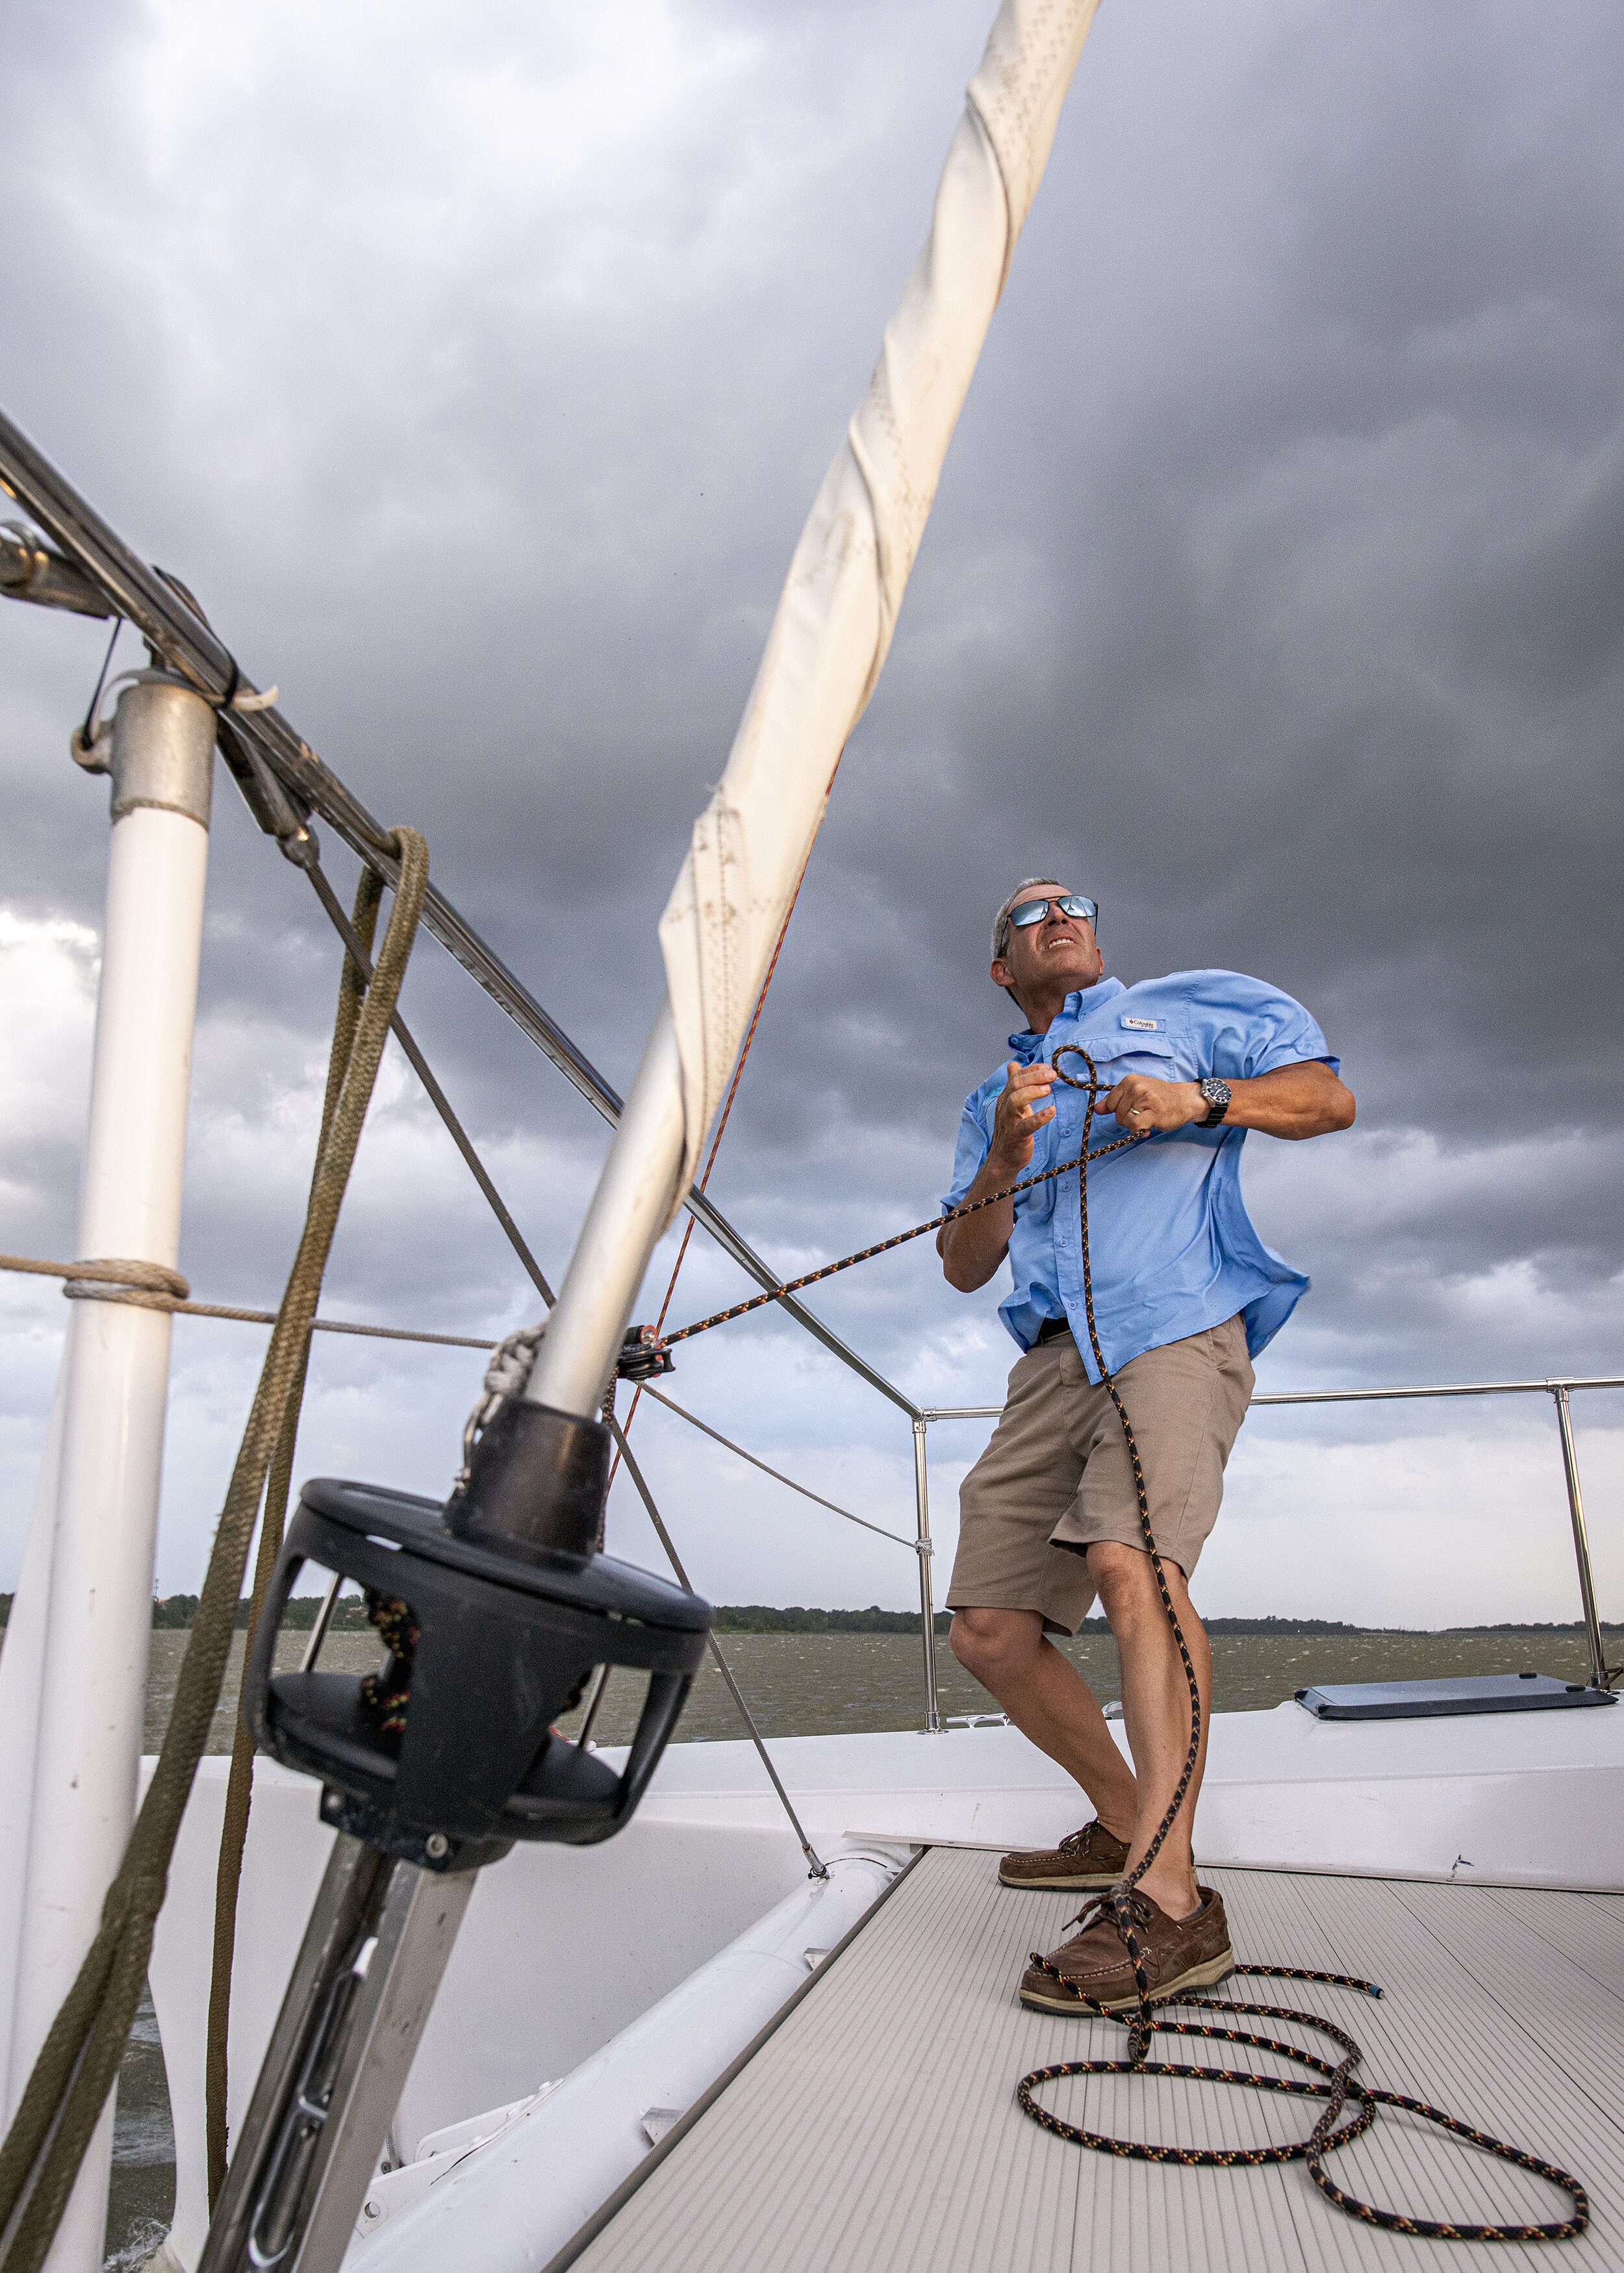  Captain Michael Mittman furls a jib sheet aboard the Spirit of Dallas on White Rock Lake in Dallas, TX.  Mittman and his wife, Greta Mittman, were competitive sailors and offered free boat rides on their 32-passenger, 38-foot-long catamaran.  “You’d